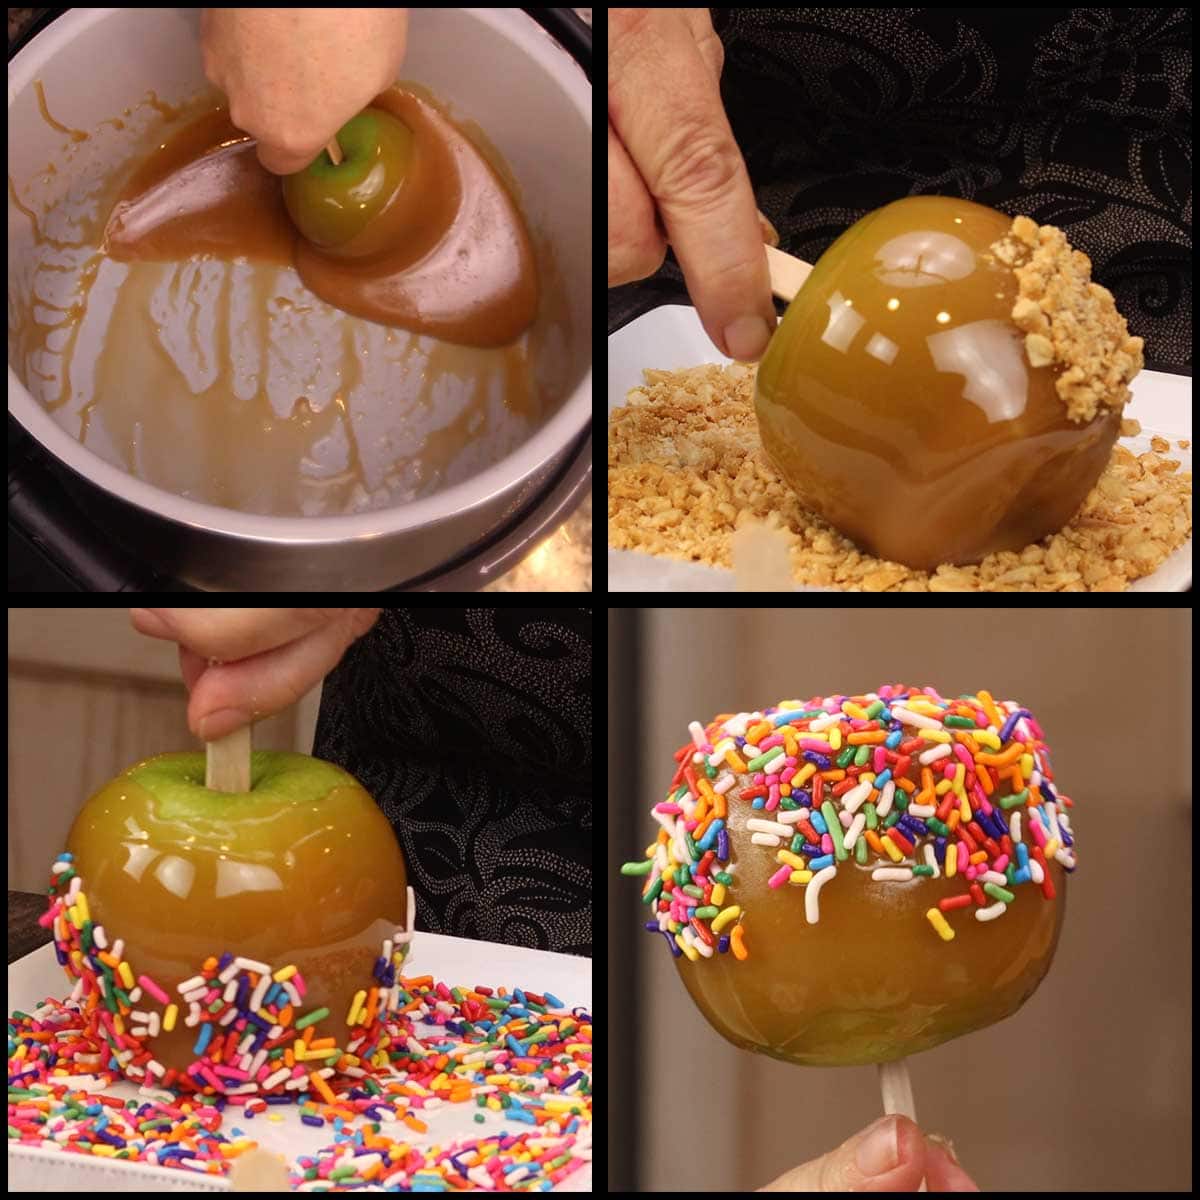 dipping the caramel apples a second time and coating them with nuts or sprinkles